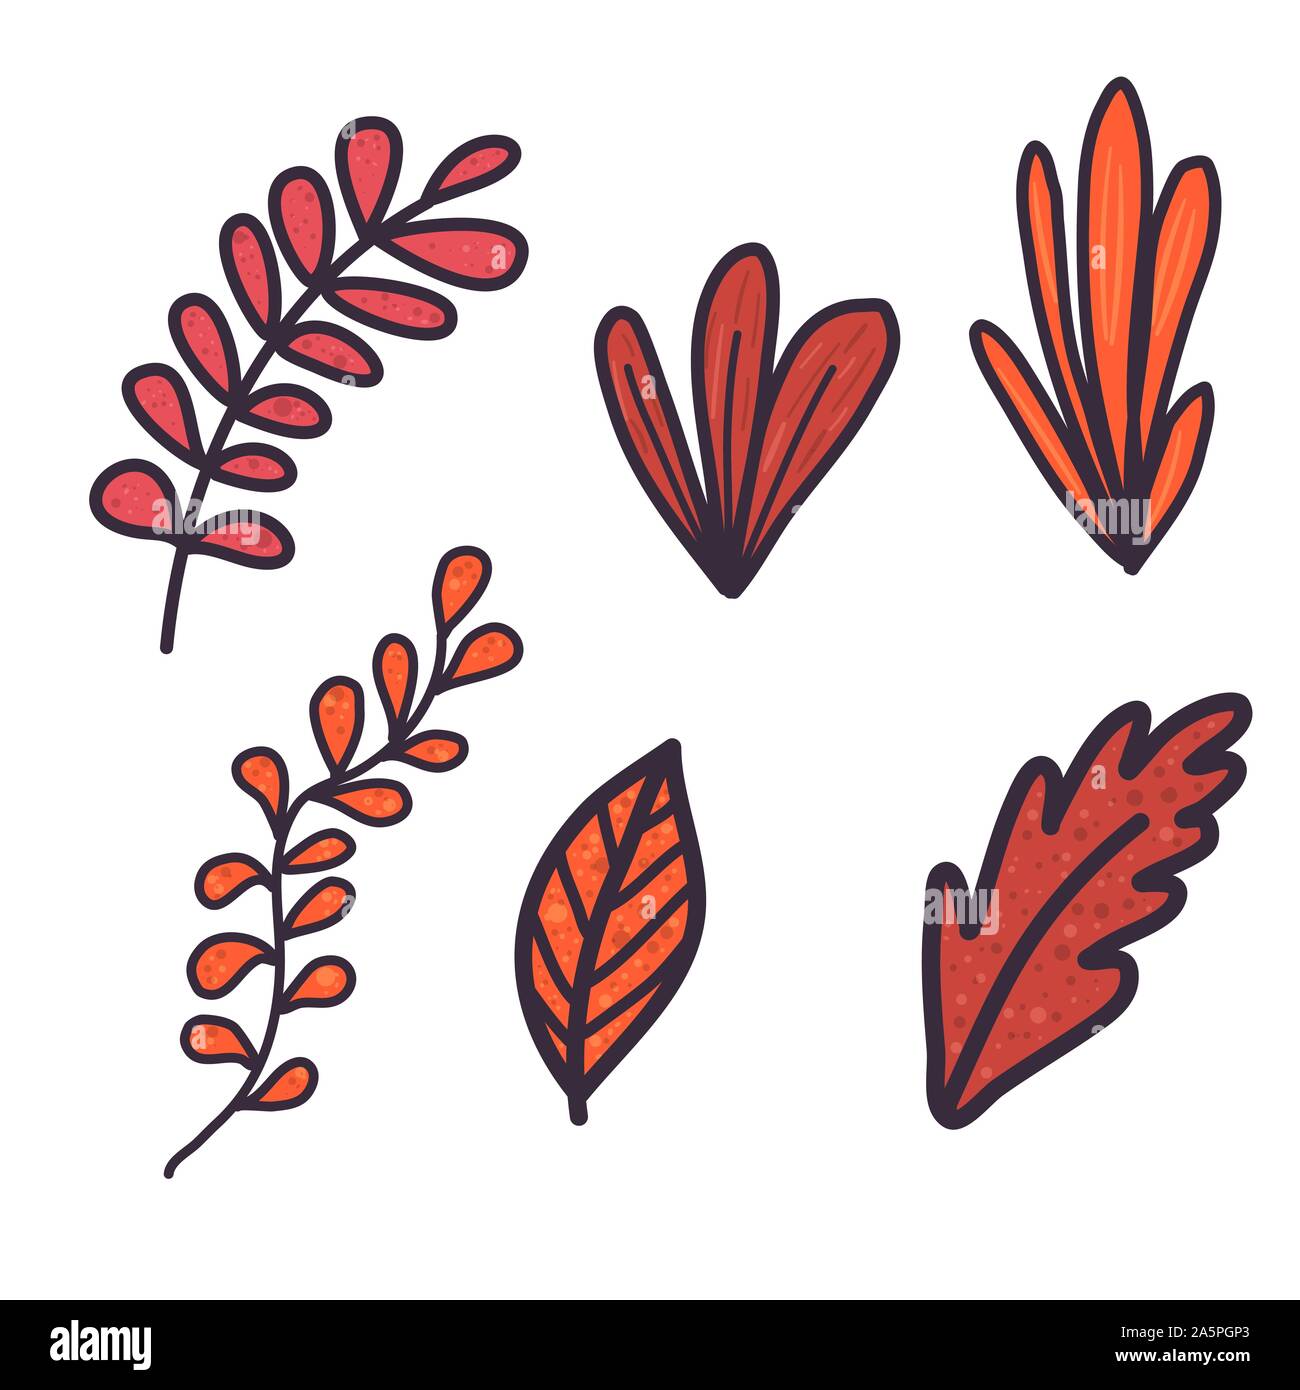 Doodle hand drawn set with orange leaf and branches on white background. Bright fall leaves. Vector design illustration. Stock Vector